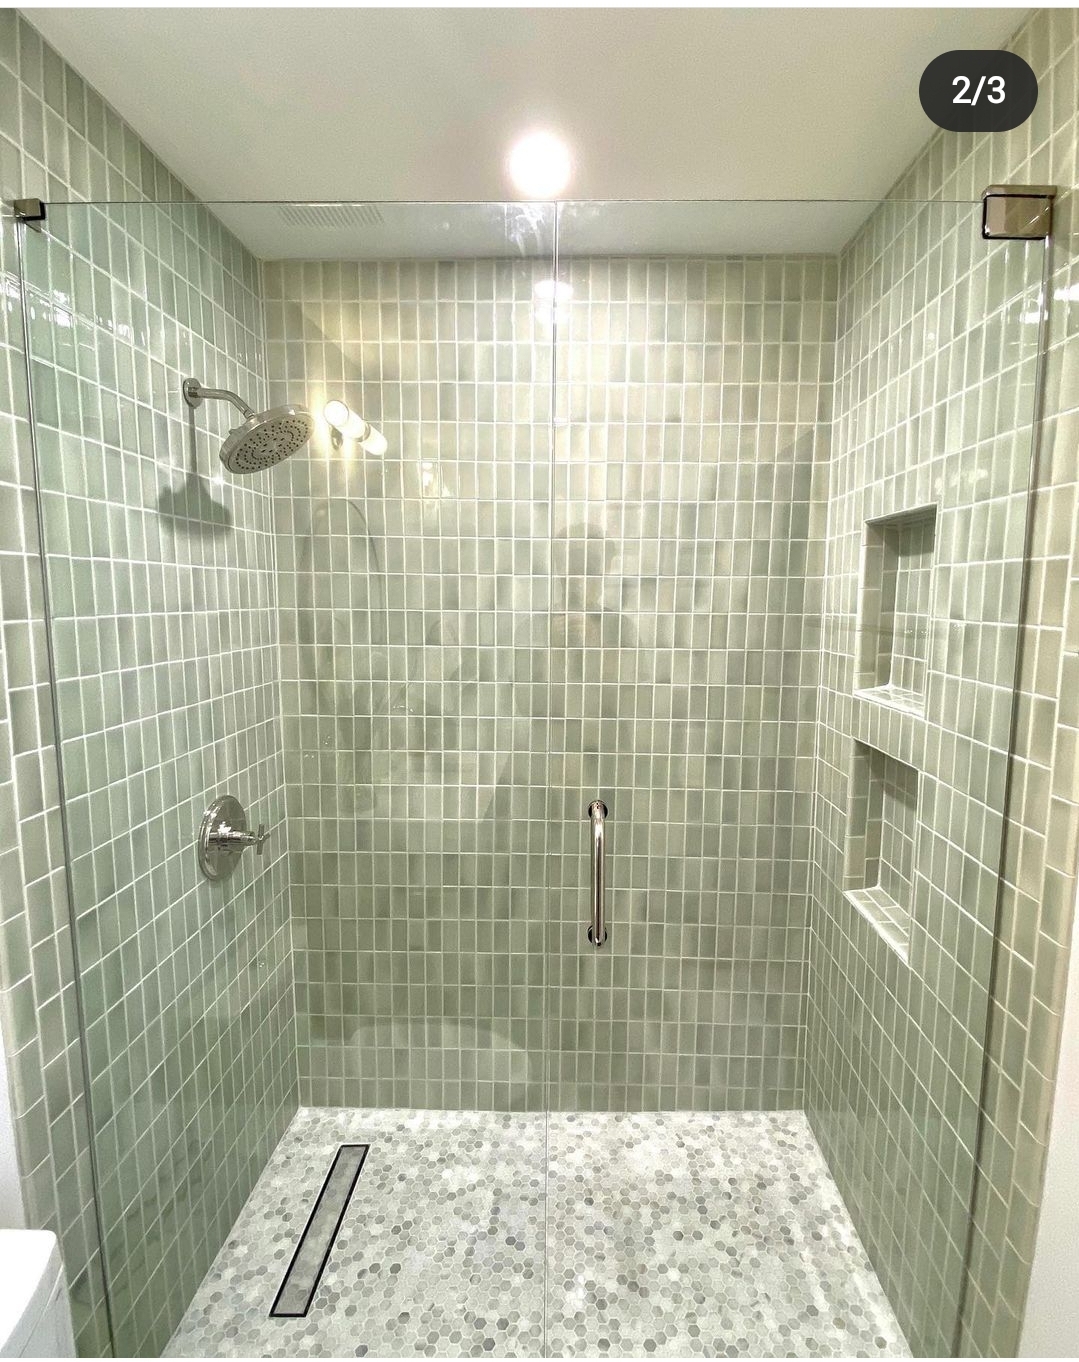 This shower features glass tile which requires a special type of hinge to alleviate pressure from the tiled wall! Gorgeous design and partnership with Nailed It Remodeling. 